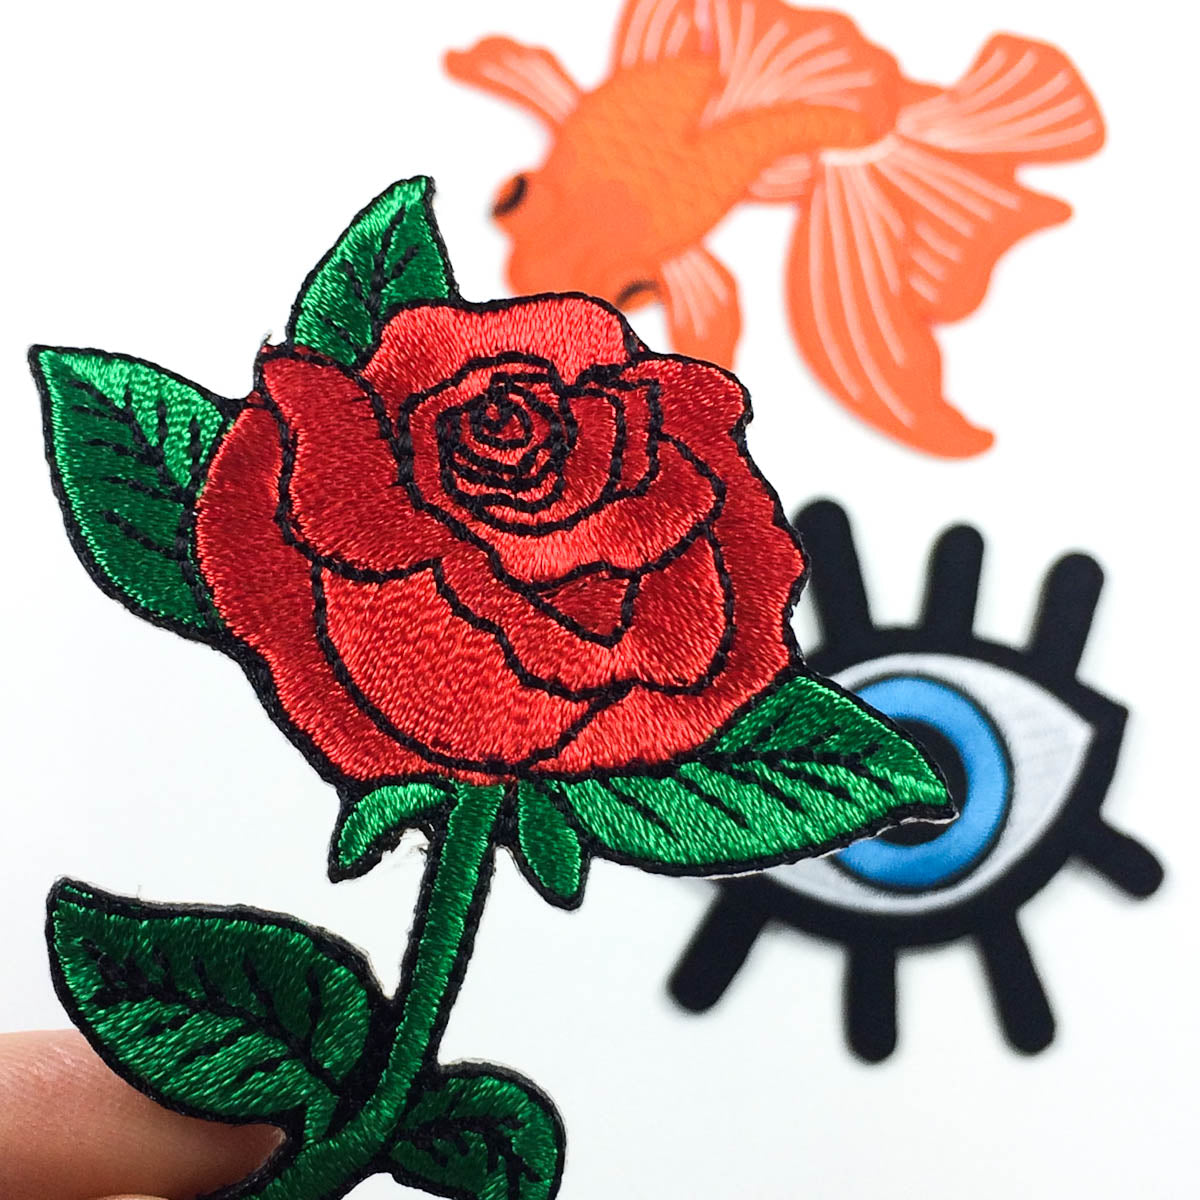 Rose Patch - Black, Pink or Red